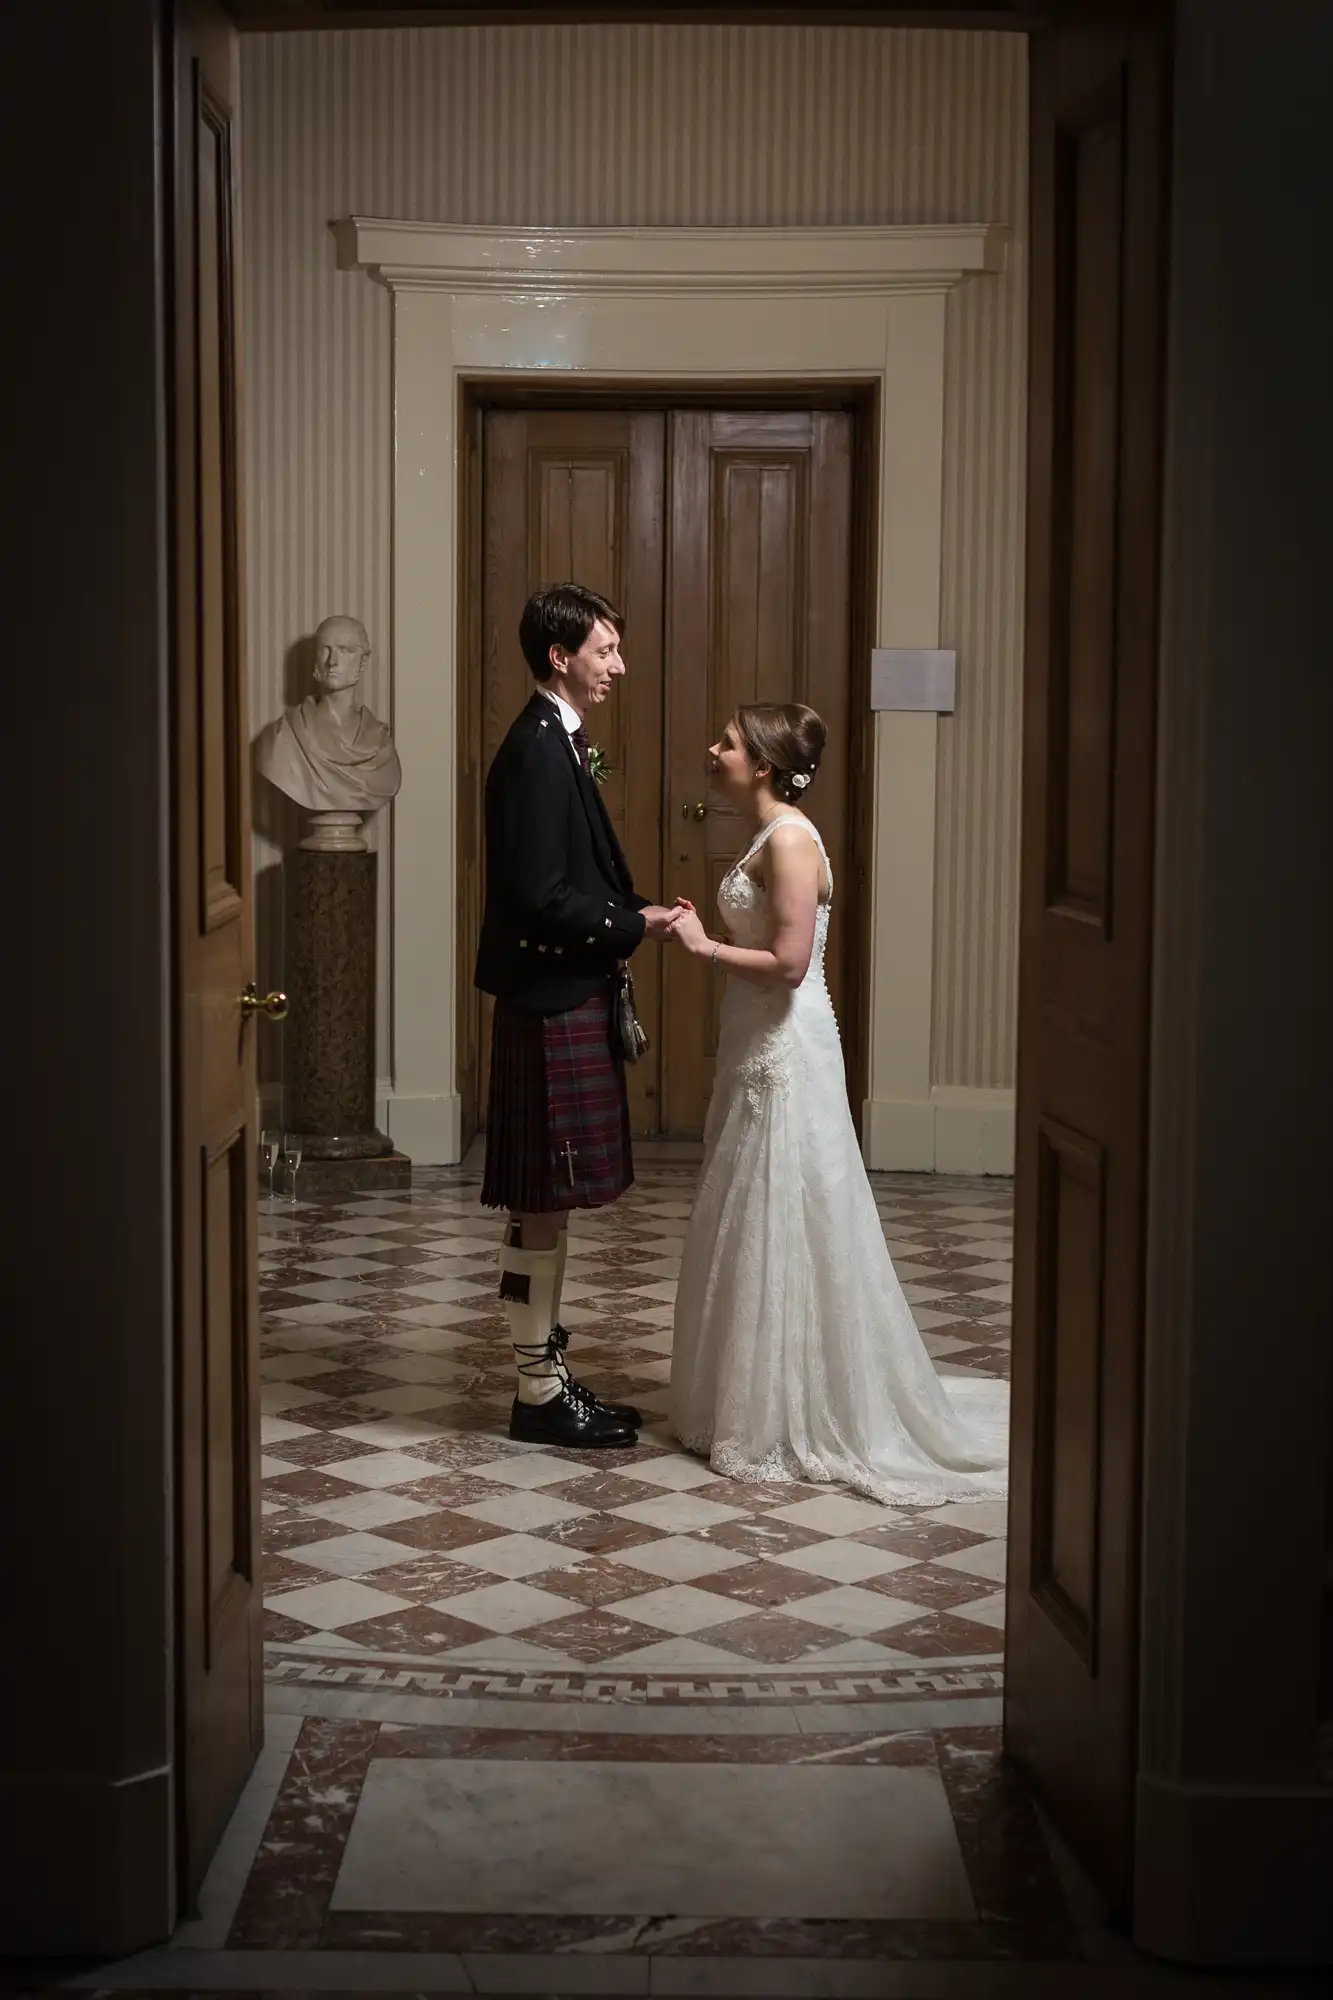 A bride and groom in formal attire smiling at each other in a hallway, the groom wearing a kilt and the bride in a lace gown.